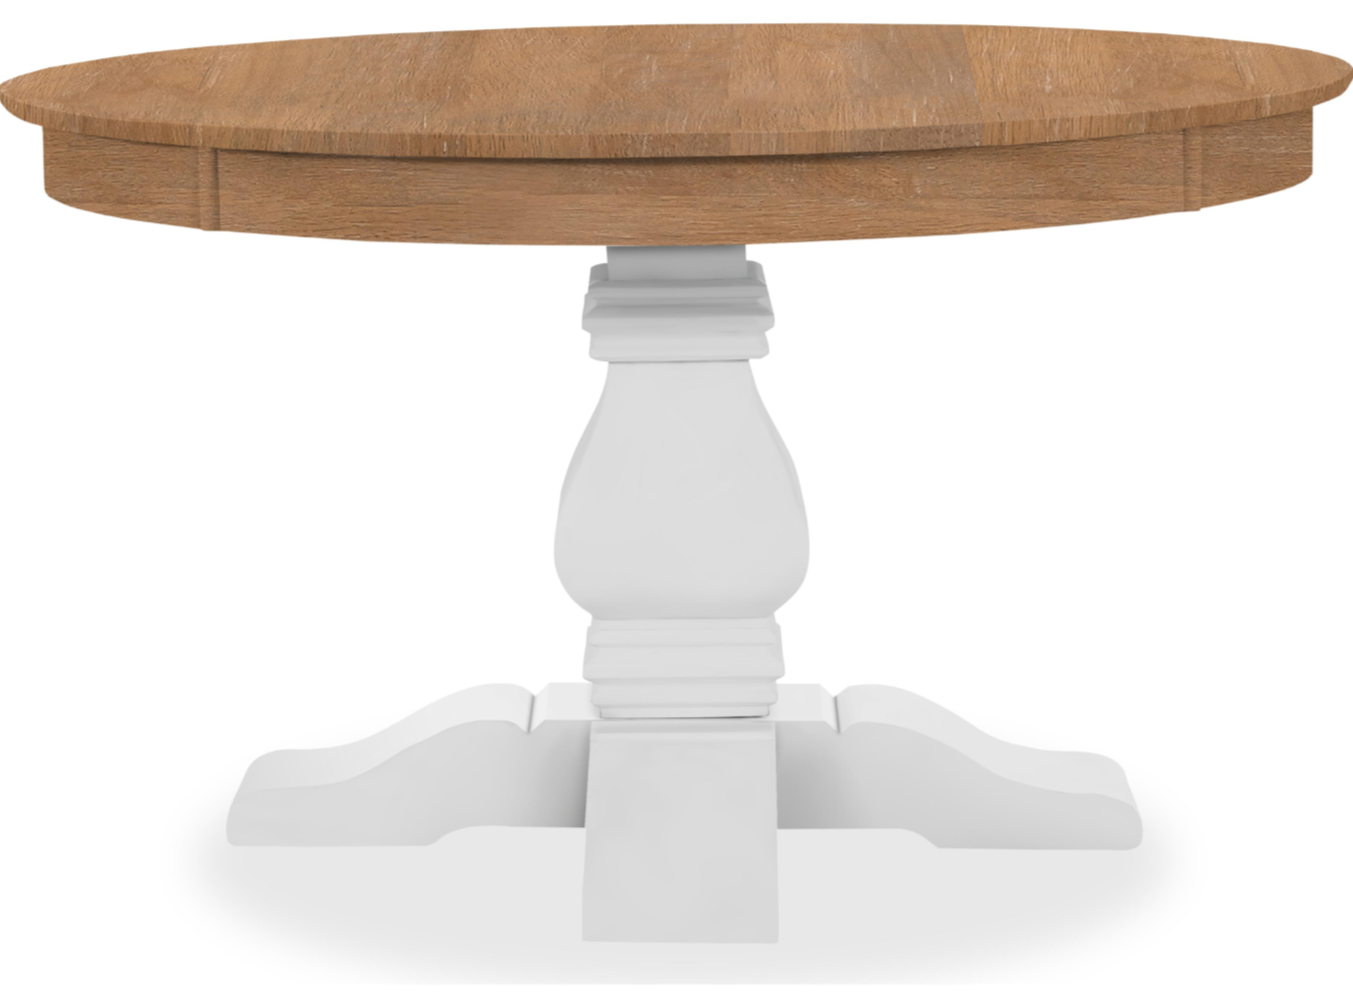 The Round Heirloom Pedestal Table